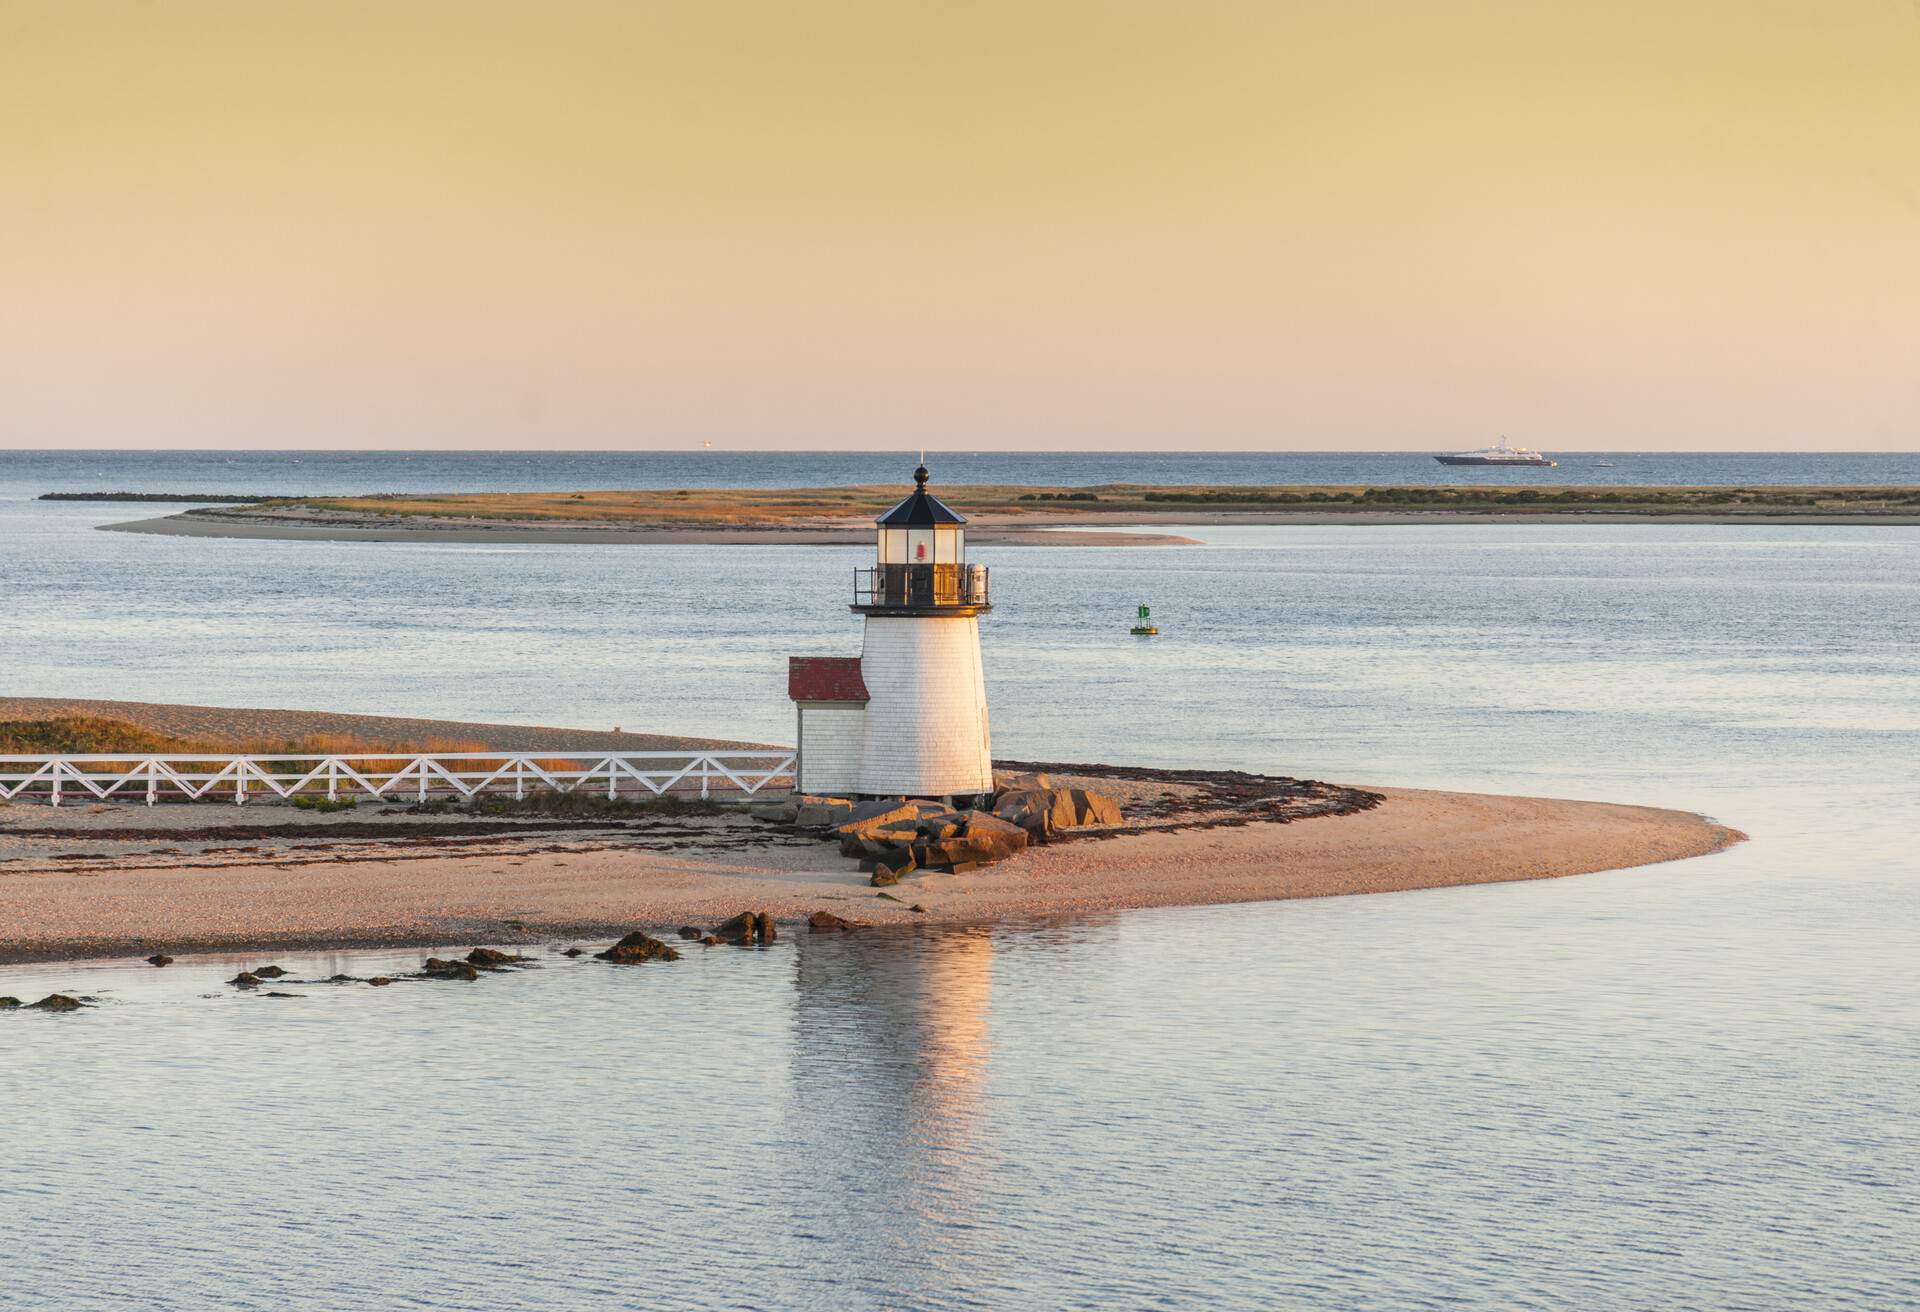 A stout lighthouse at the tip of an island surrounded by tranquil waters.